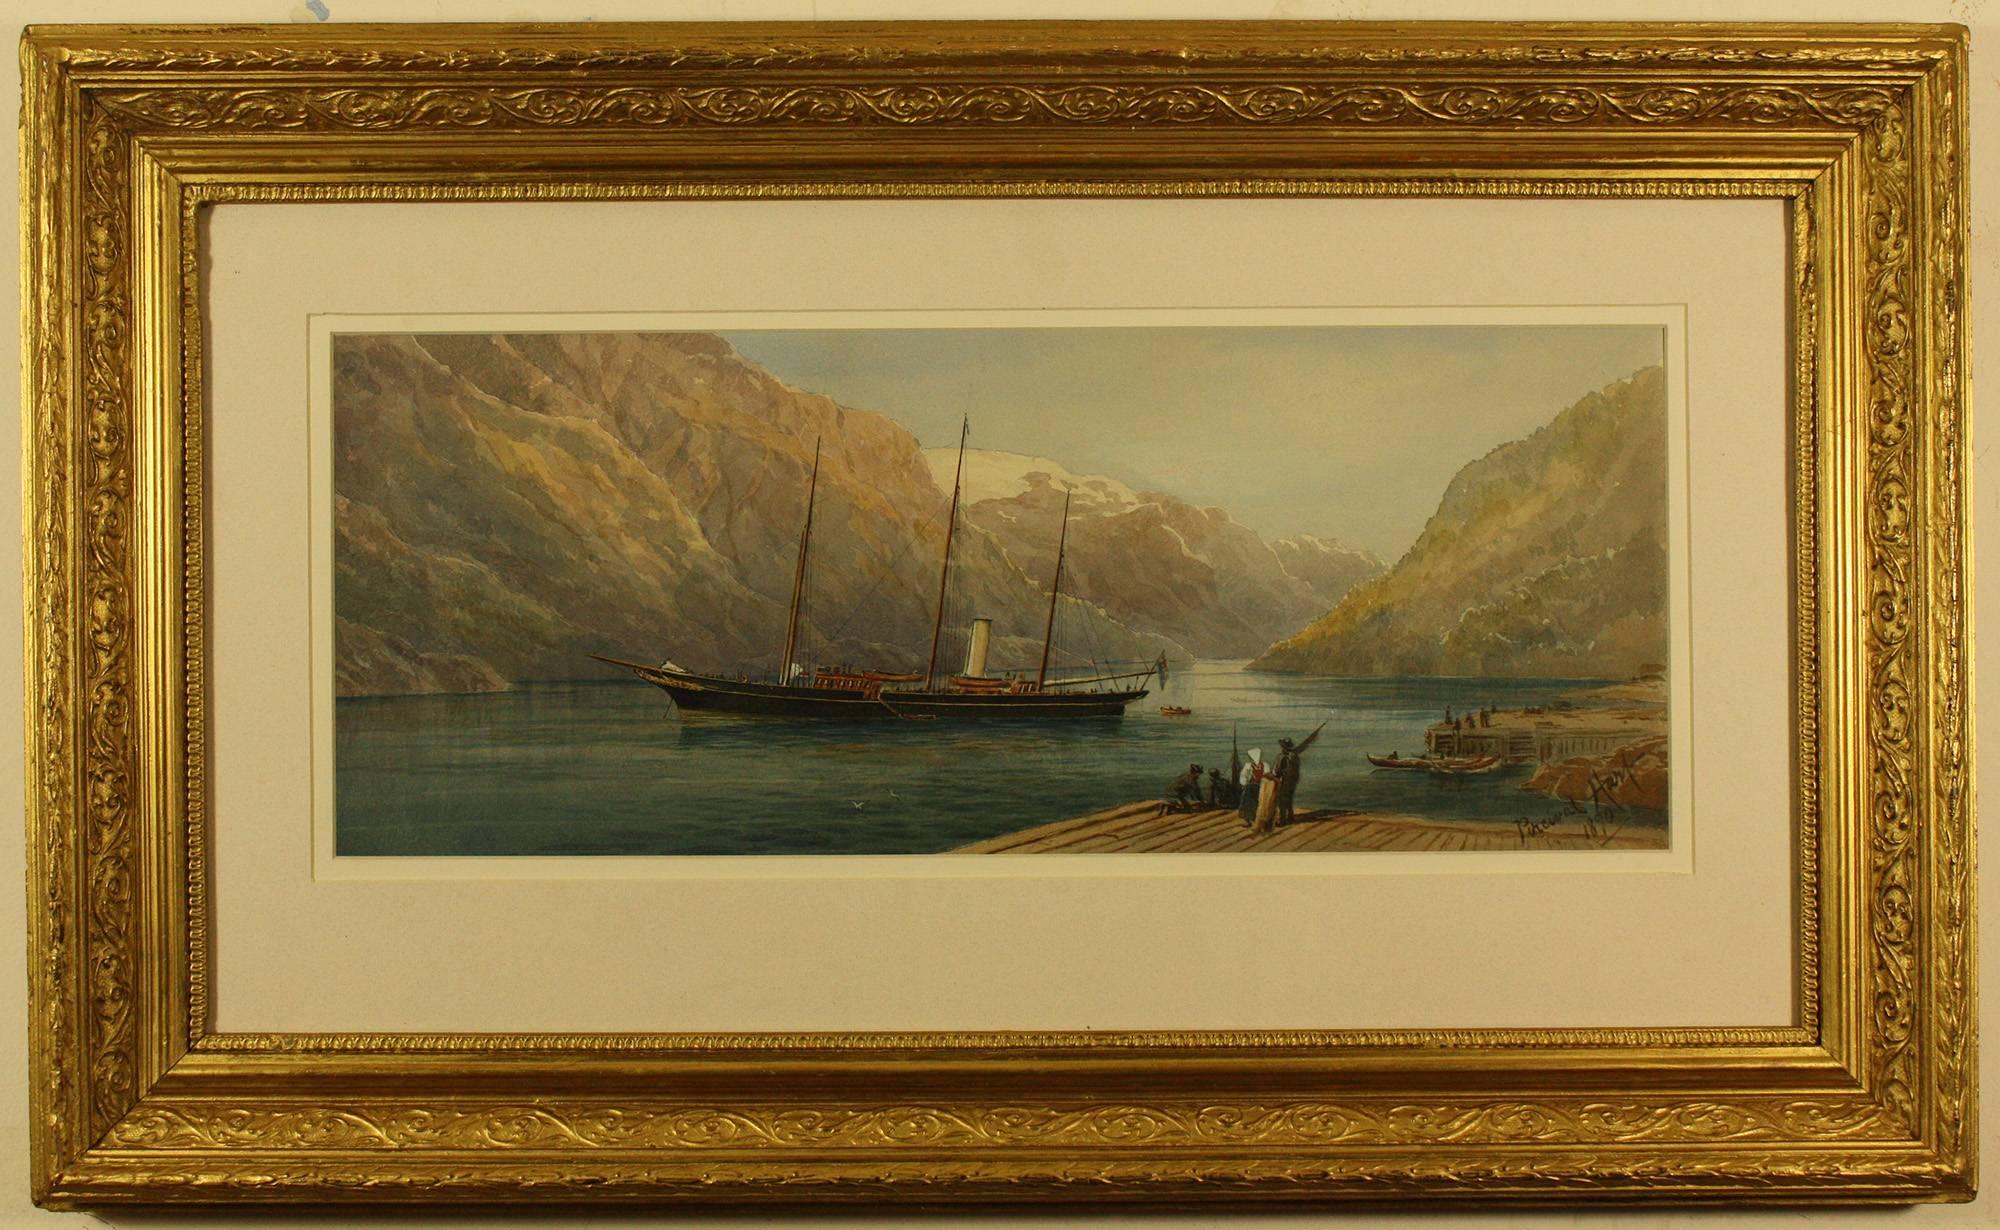 Boat on the Hardanger Fjord at Odda, Norway by Horace Percival Hart 
Image Size 19.75 ins by 7.75 ins
Overall frame size 29 ins by 17.5 ins
Horace Percival Hart
Born 1865 Falmouth, Cornwall
Died 18 Jan 1896, Polbrean, Landwednack, Cornwall
2nd son